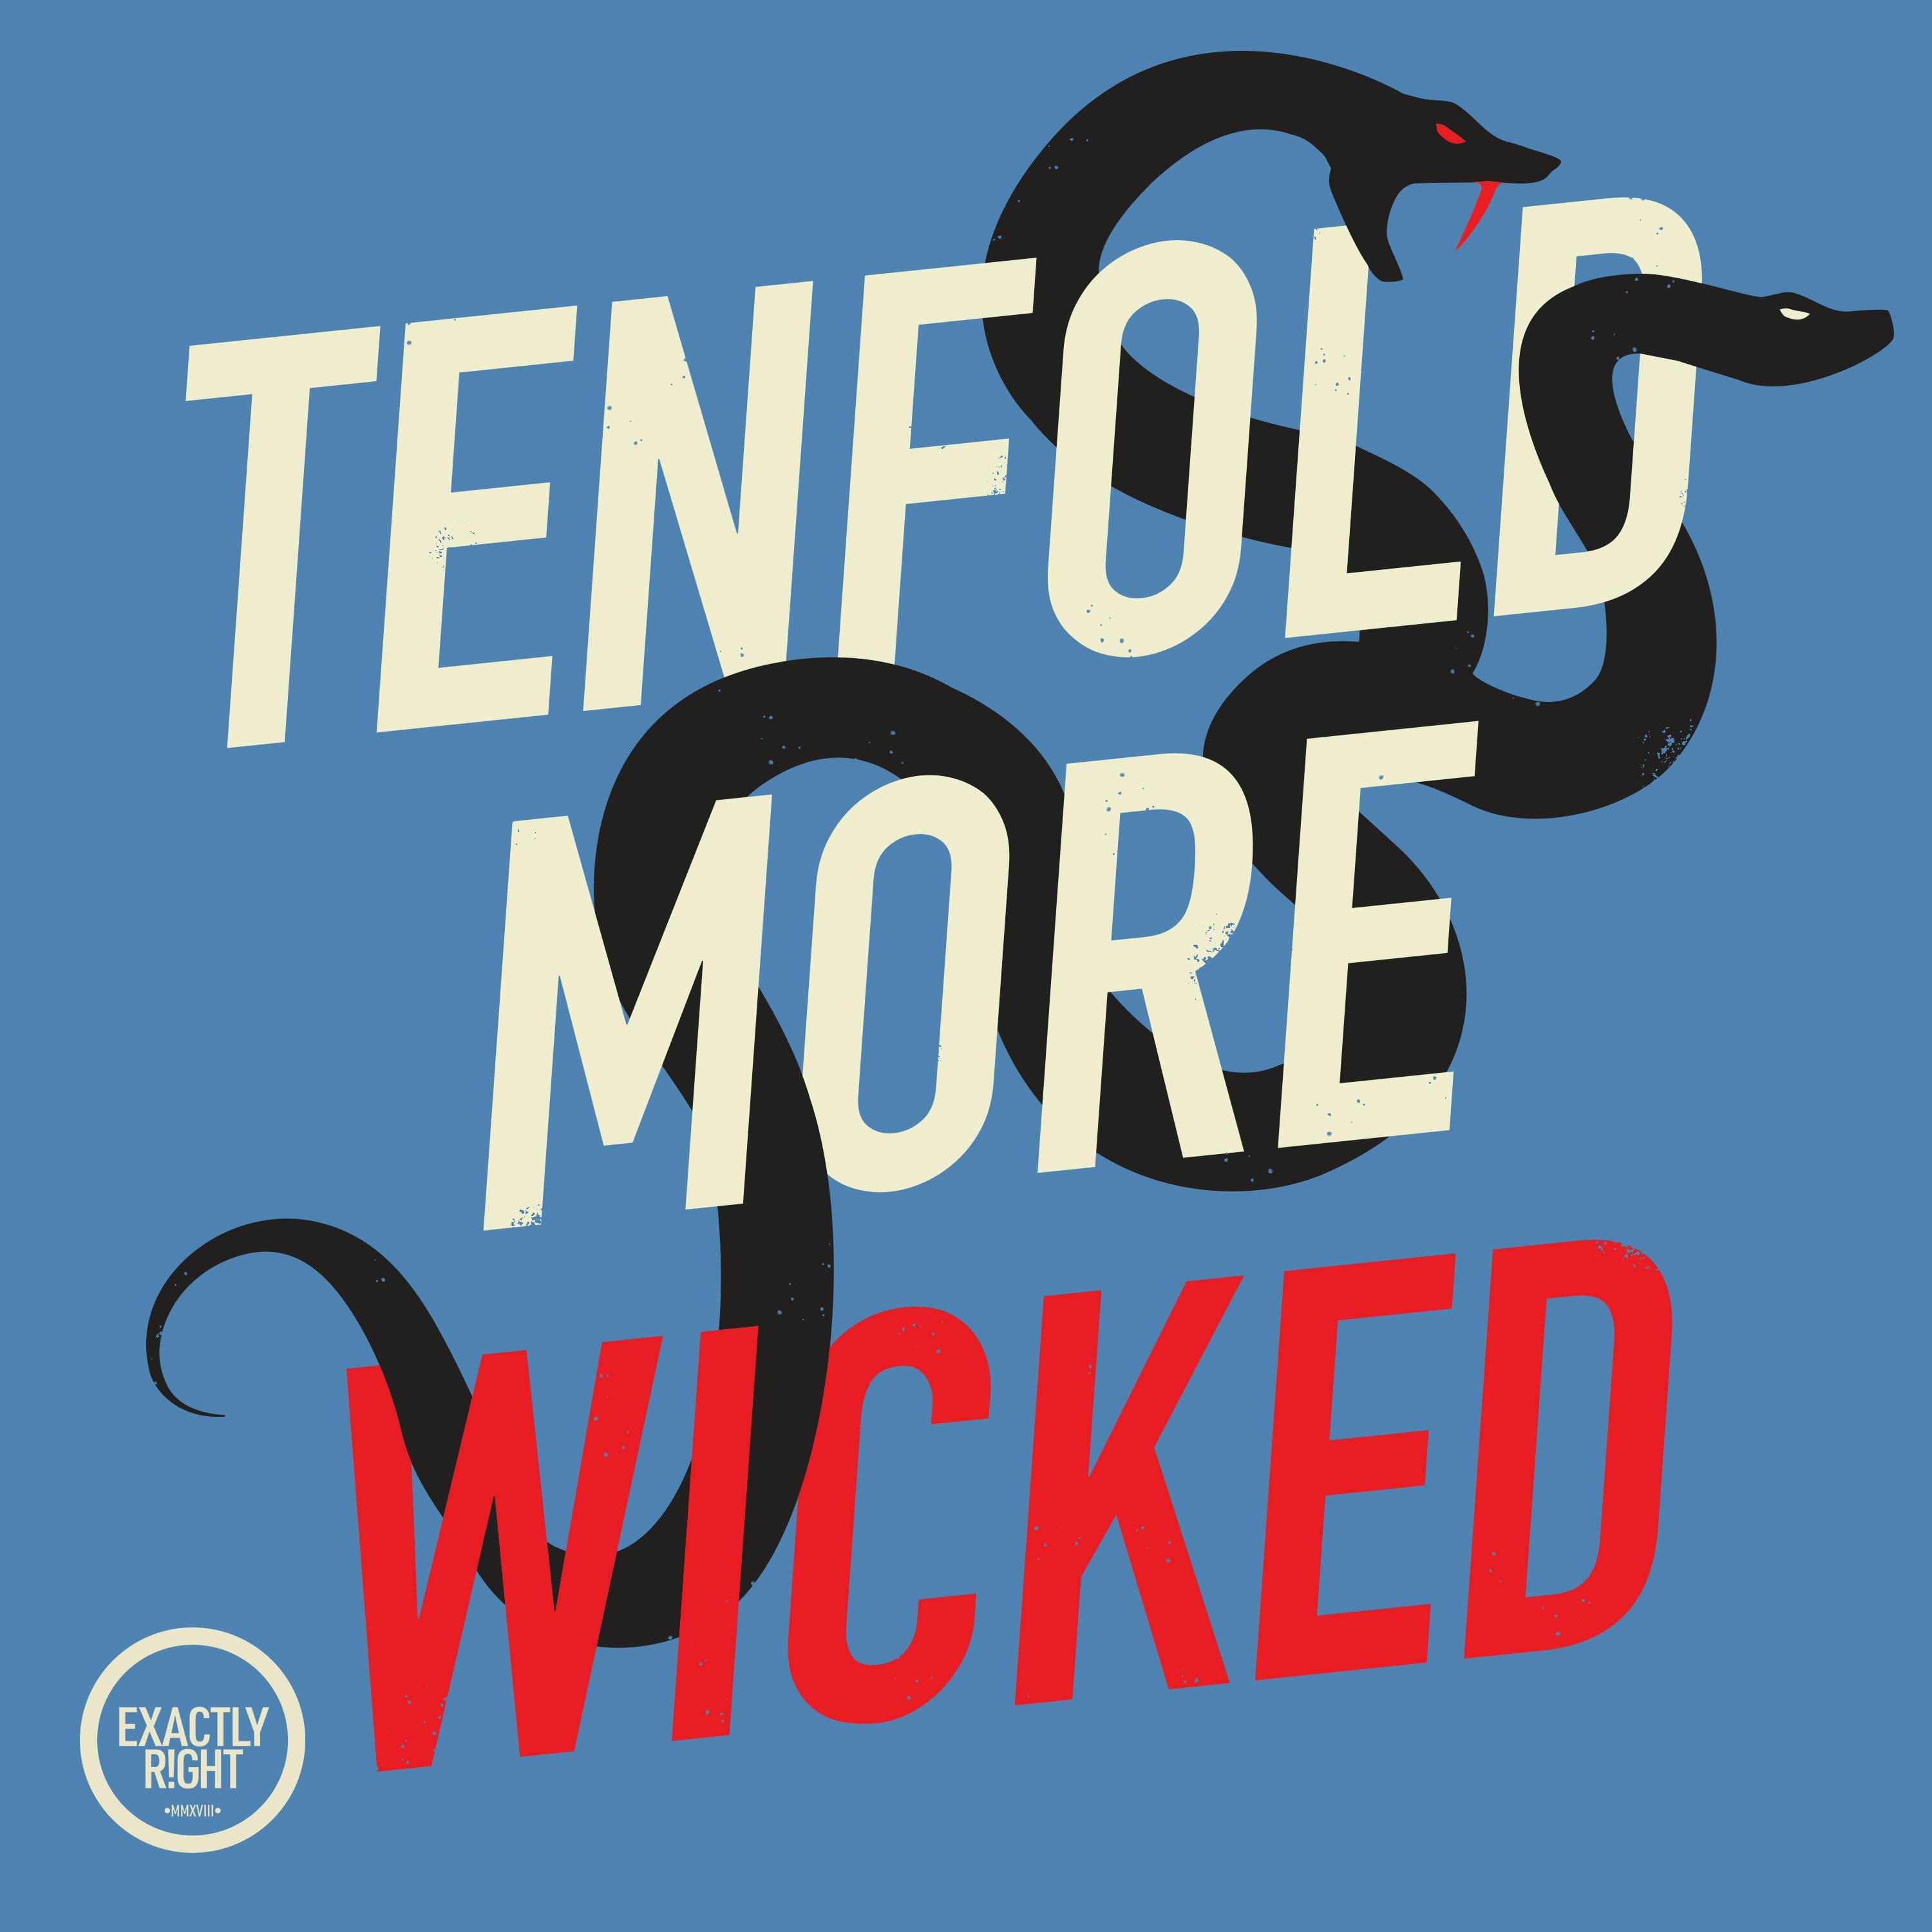 Tenfold More Wicked - Entitled: The Virginia Elite